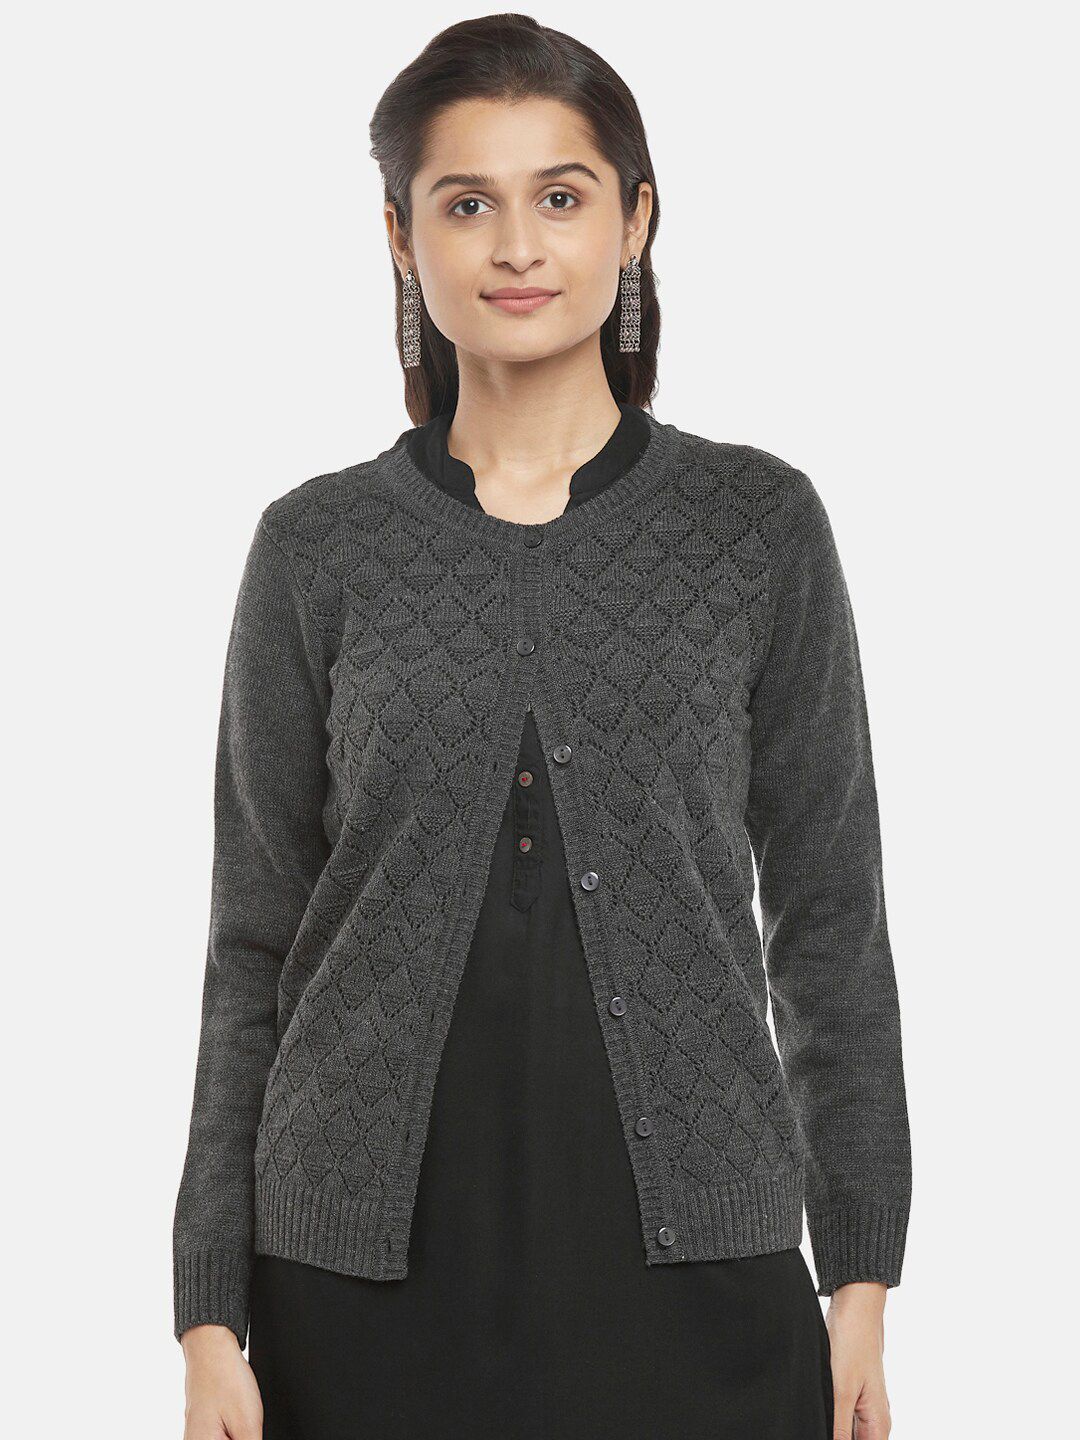 RANGMANCH BY PANTALOONS Women Charcoal Self Designed Acrylic Cardigan Sweater Price in India